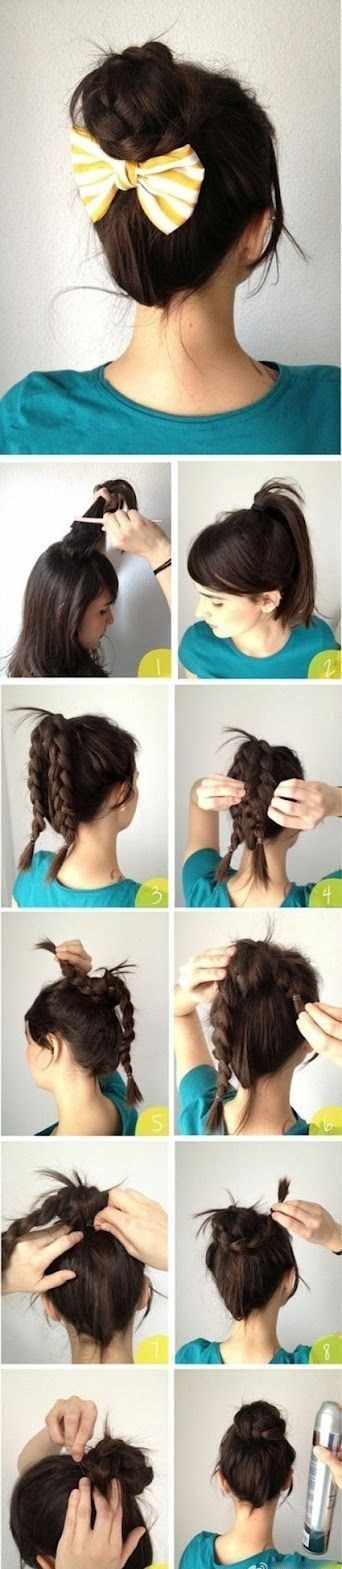 Simple hairstyles to do at home simple-hairstyles-to-do-at-home-98_17